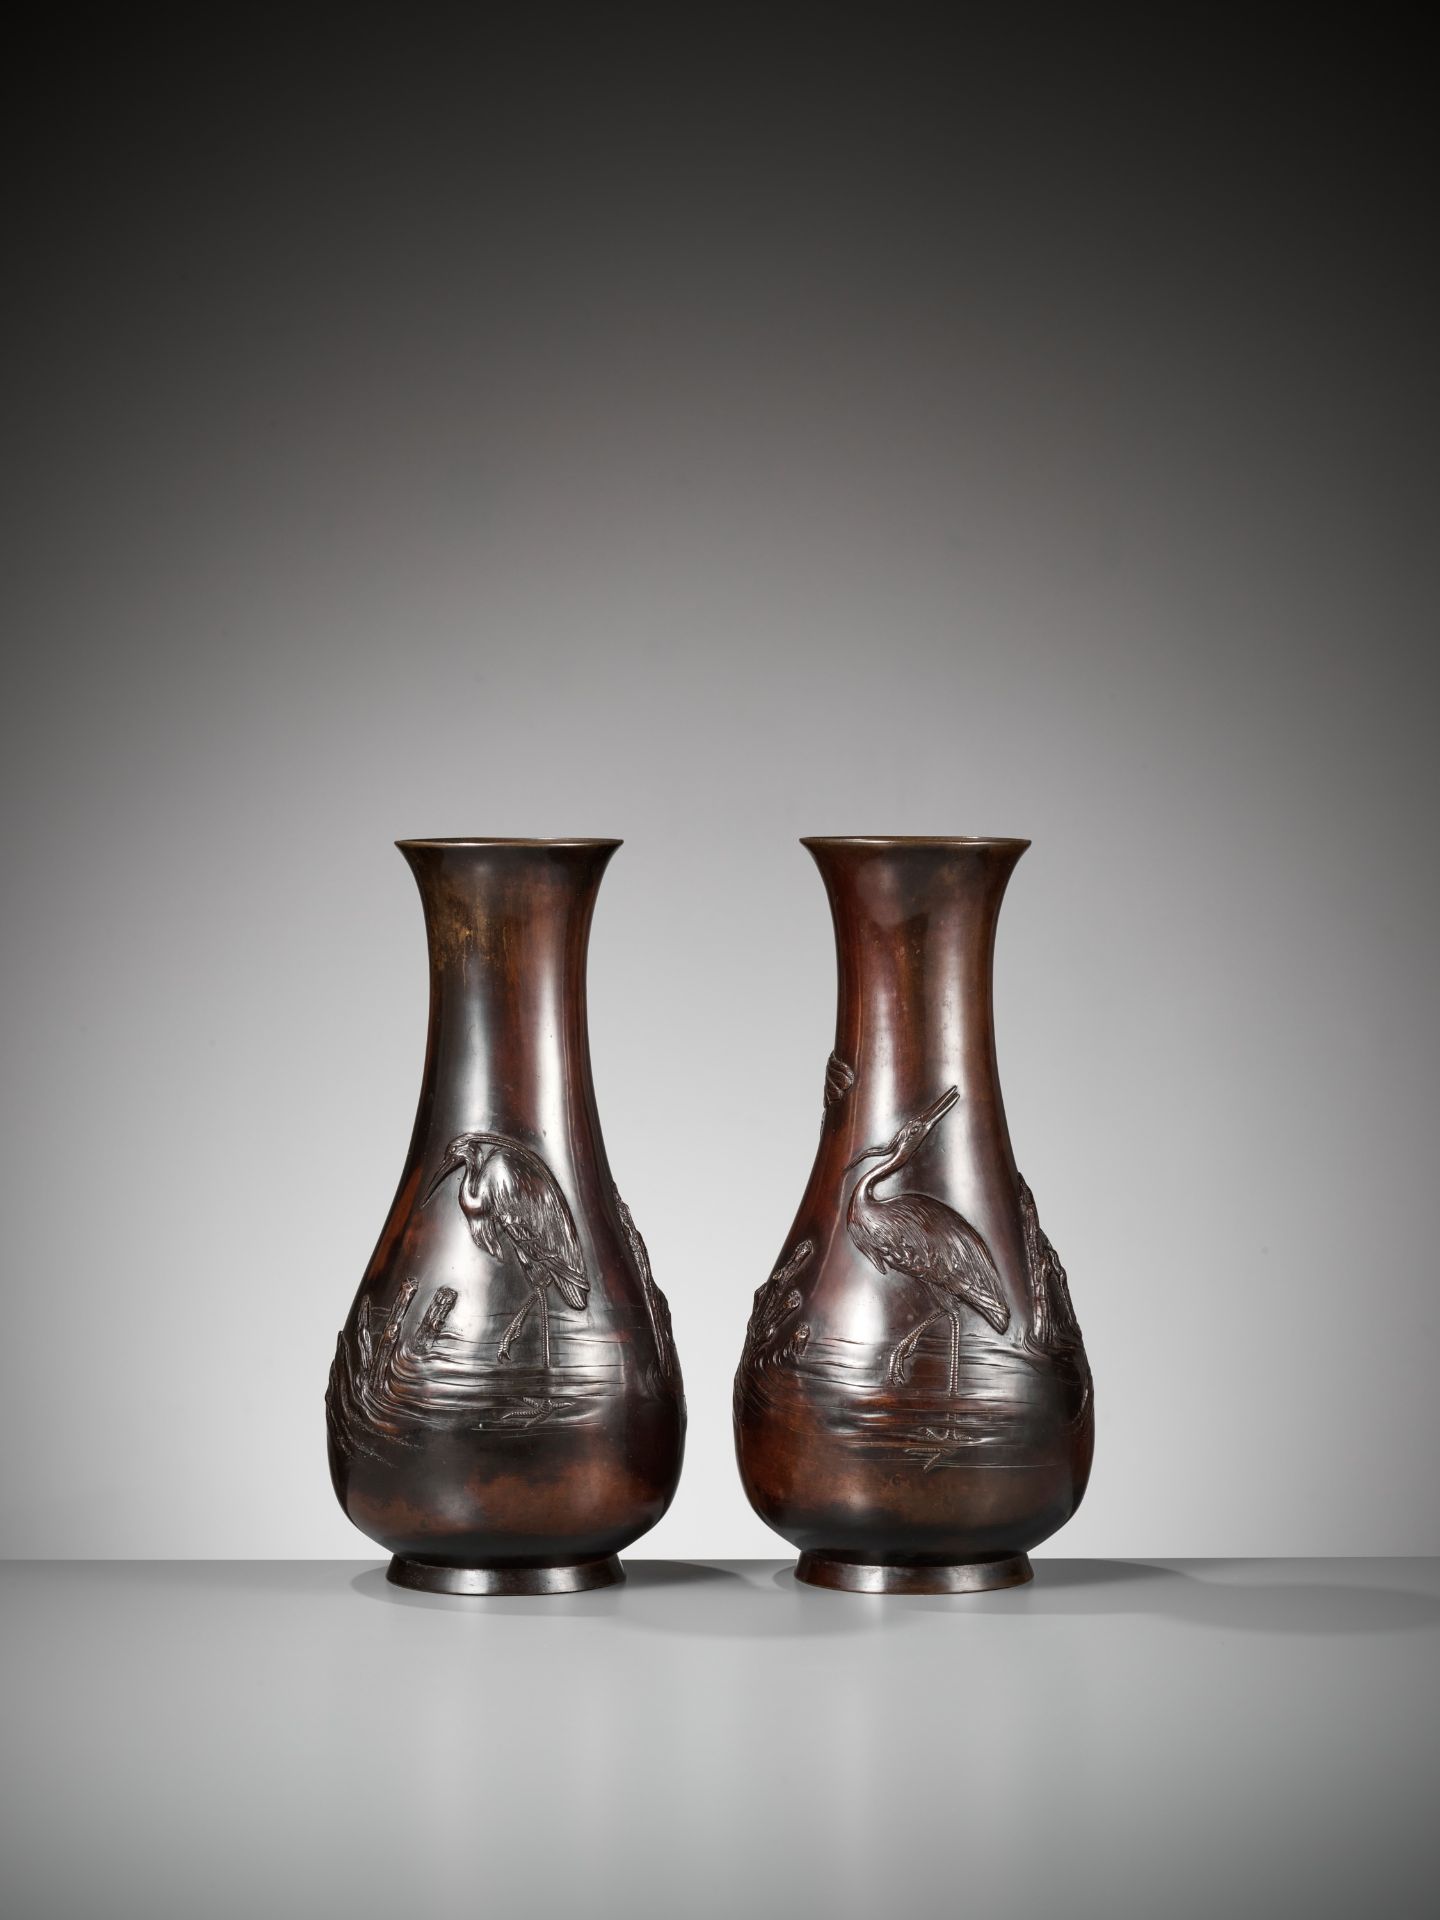 A PAIR OF BRONZE VASES DEPICTING EGRETS - Image 5 of 8